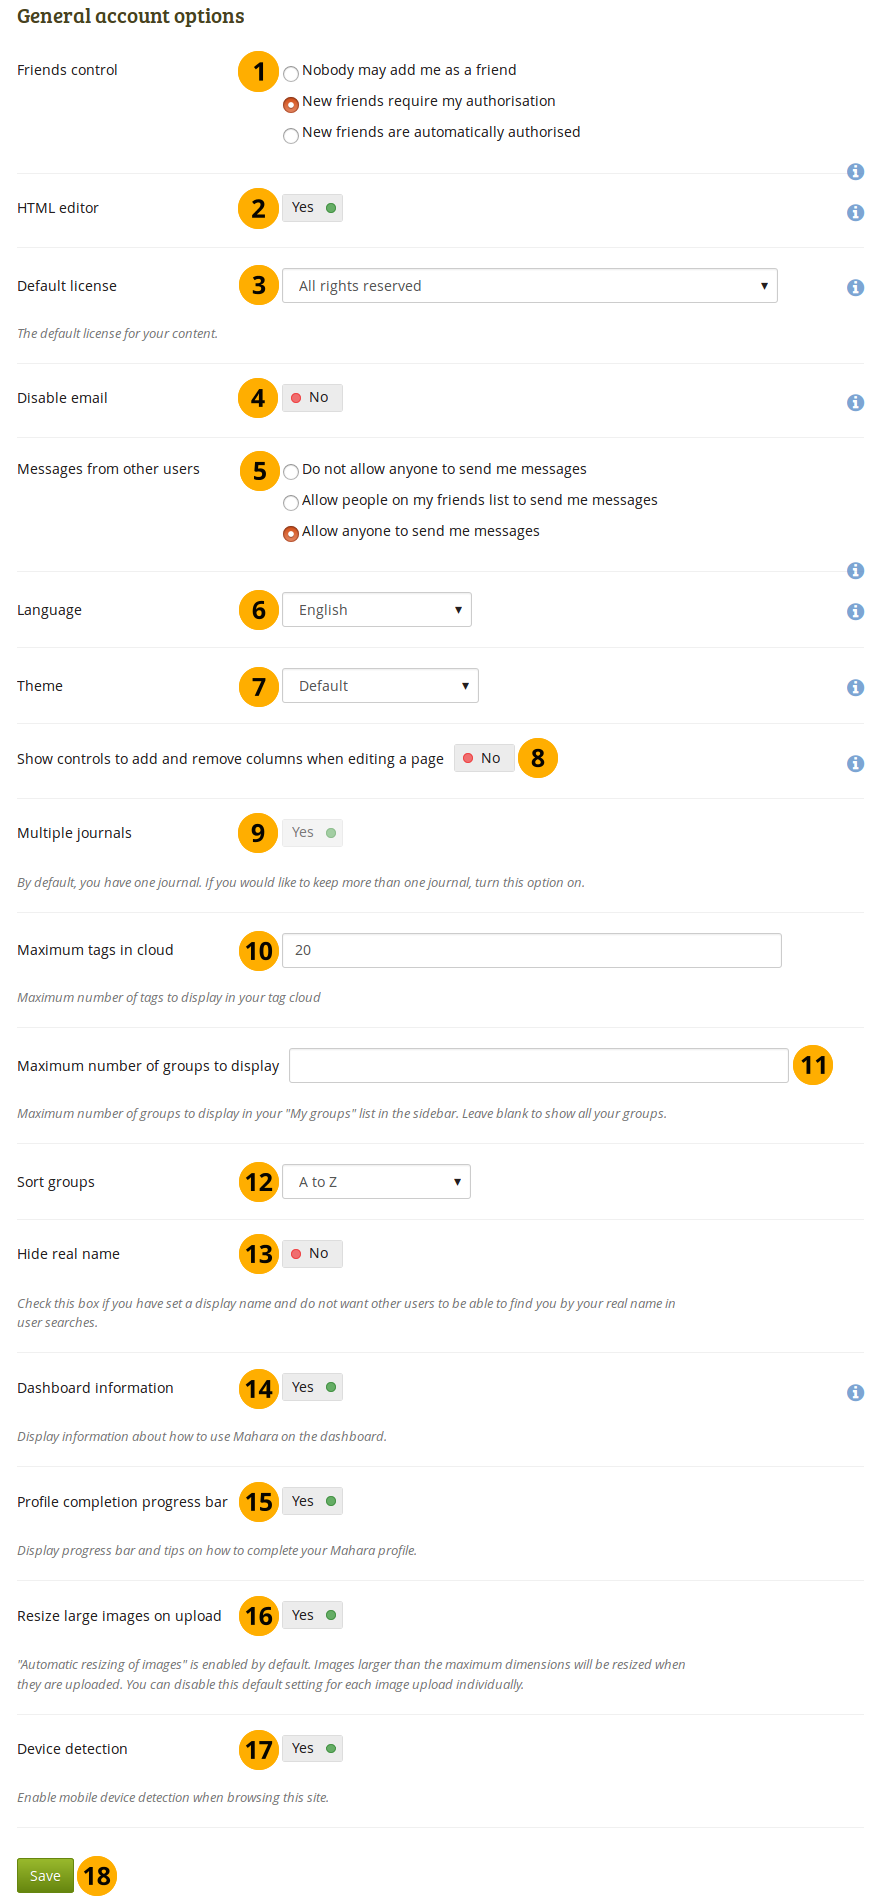 View and change your general account options